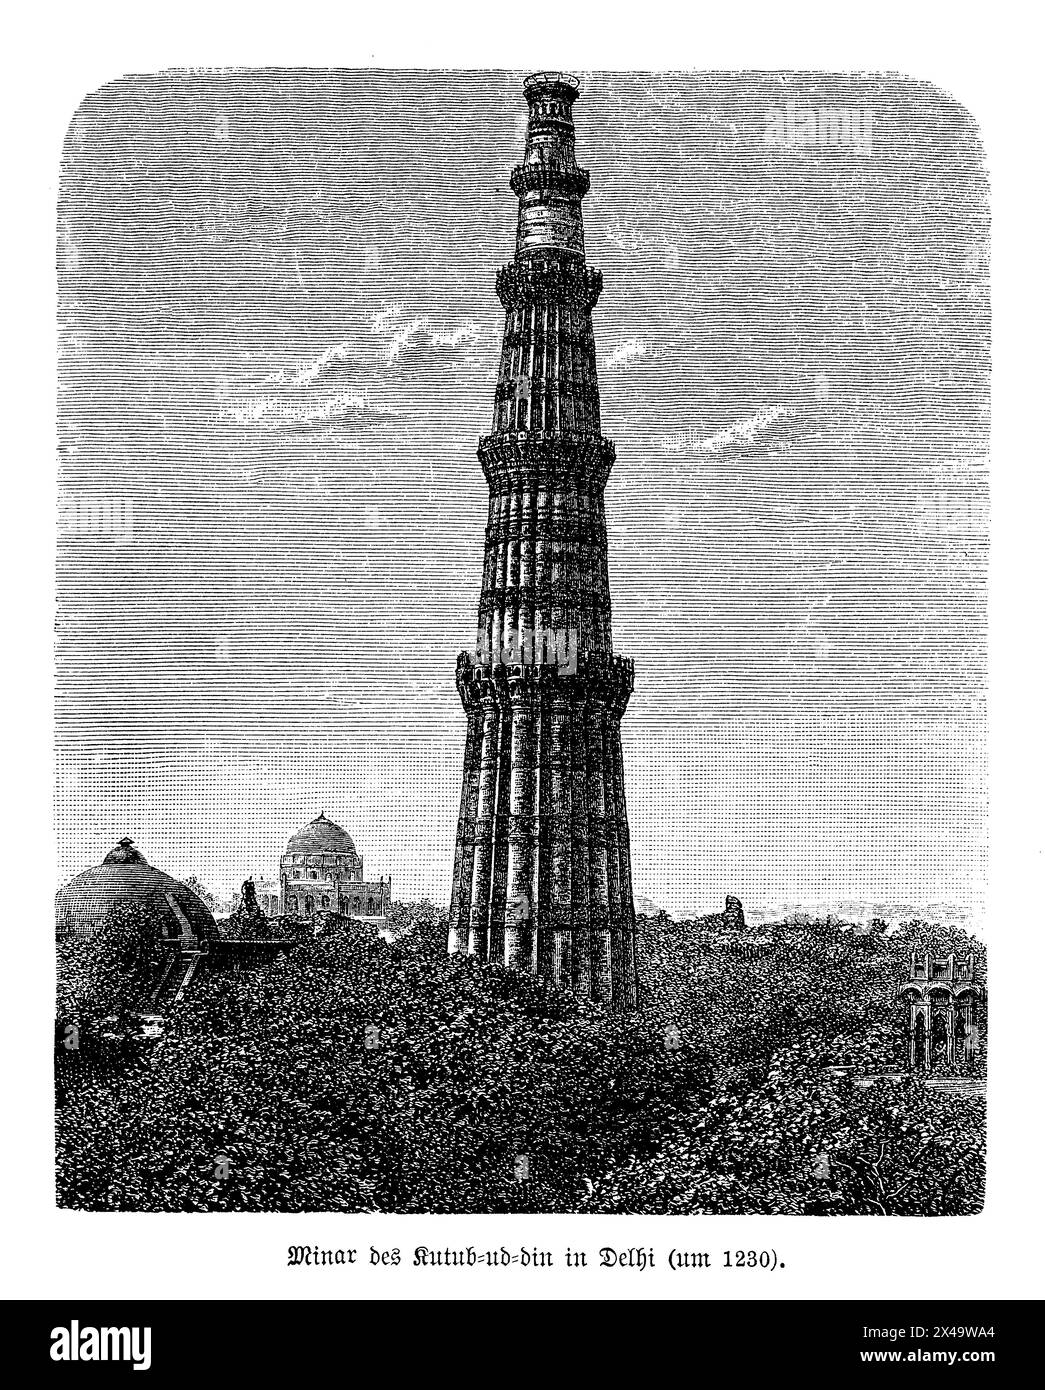 The Qutb Minar, constructed in the early 13th century, is the tallest brick minaret in the world and a UNESCO World Heritage Site. It features a series of superposed flanged and cylindrical shafts, separated by balconies, each adorned with intricate carvings and calligraphy that narrate the minaret’s history and the triumph of Islam in Northern India. The surrounding archaeological complex includes several historically significant monuments, each echoing the rich cultural tapestry of the region. Stock Photo